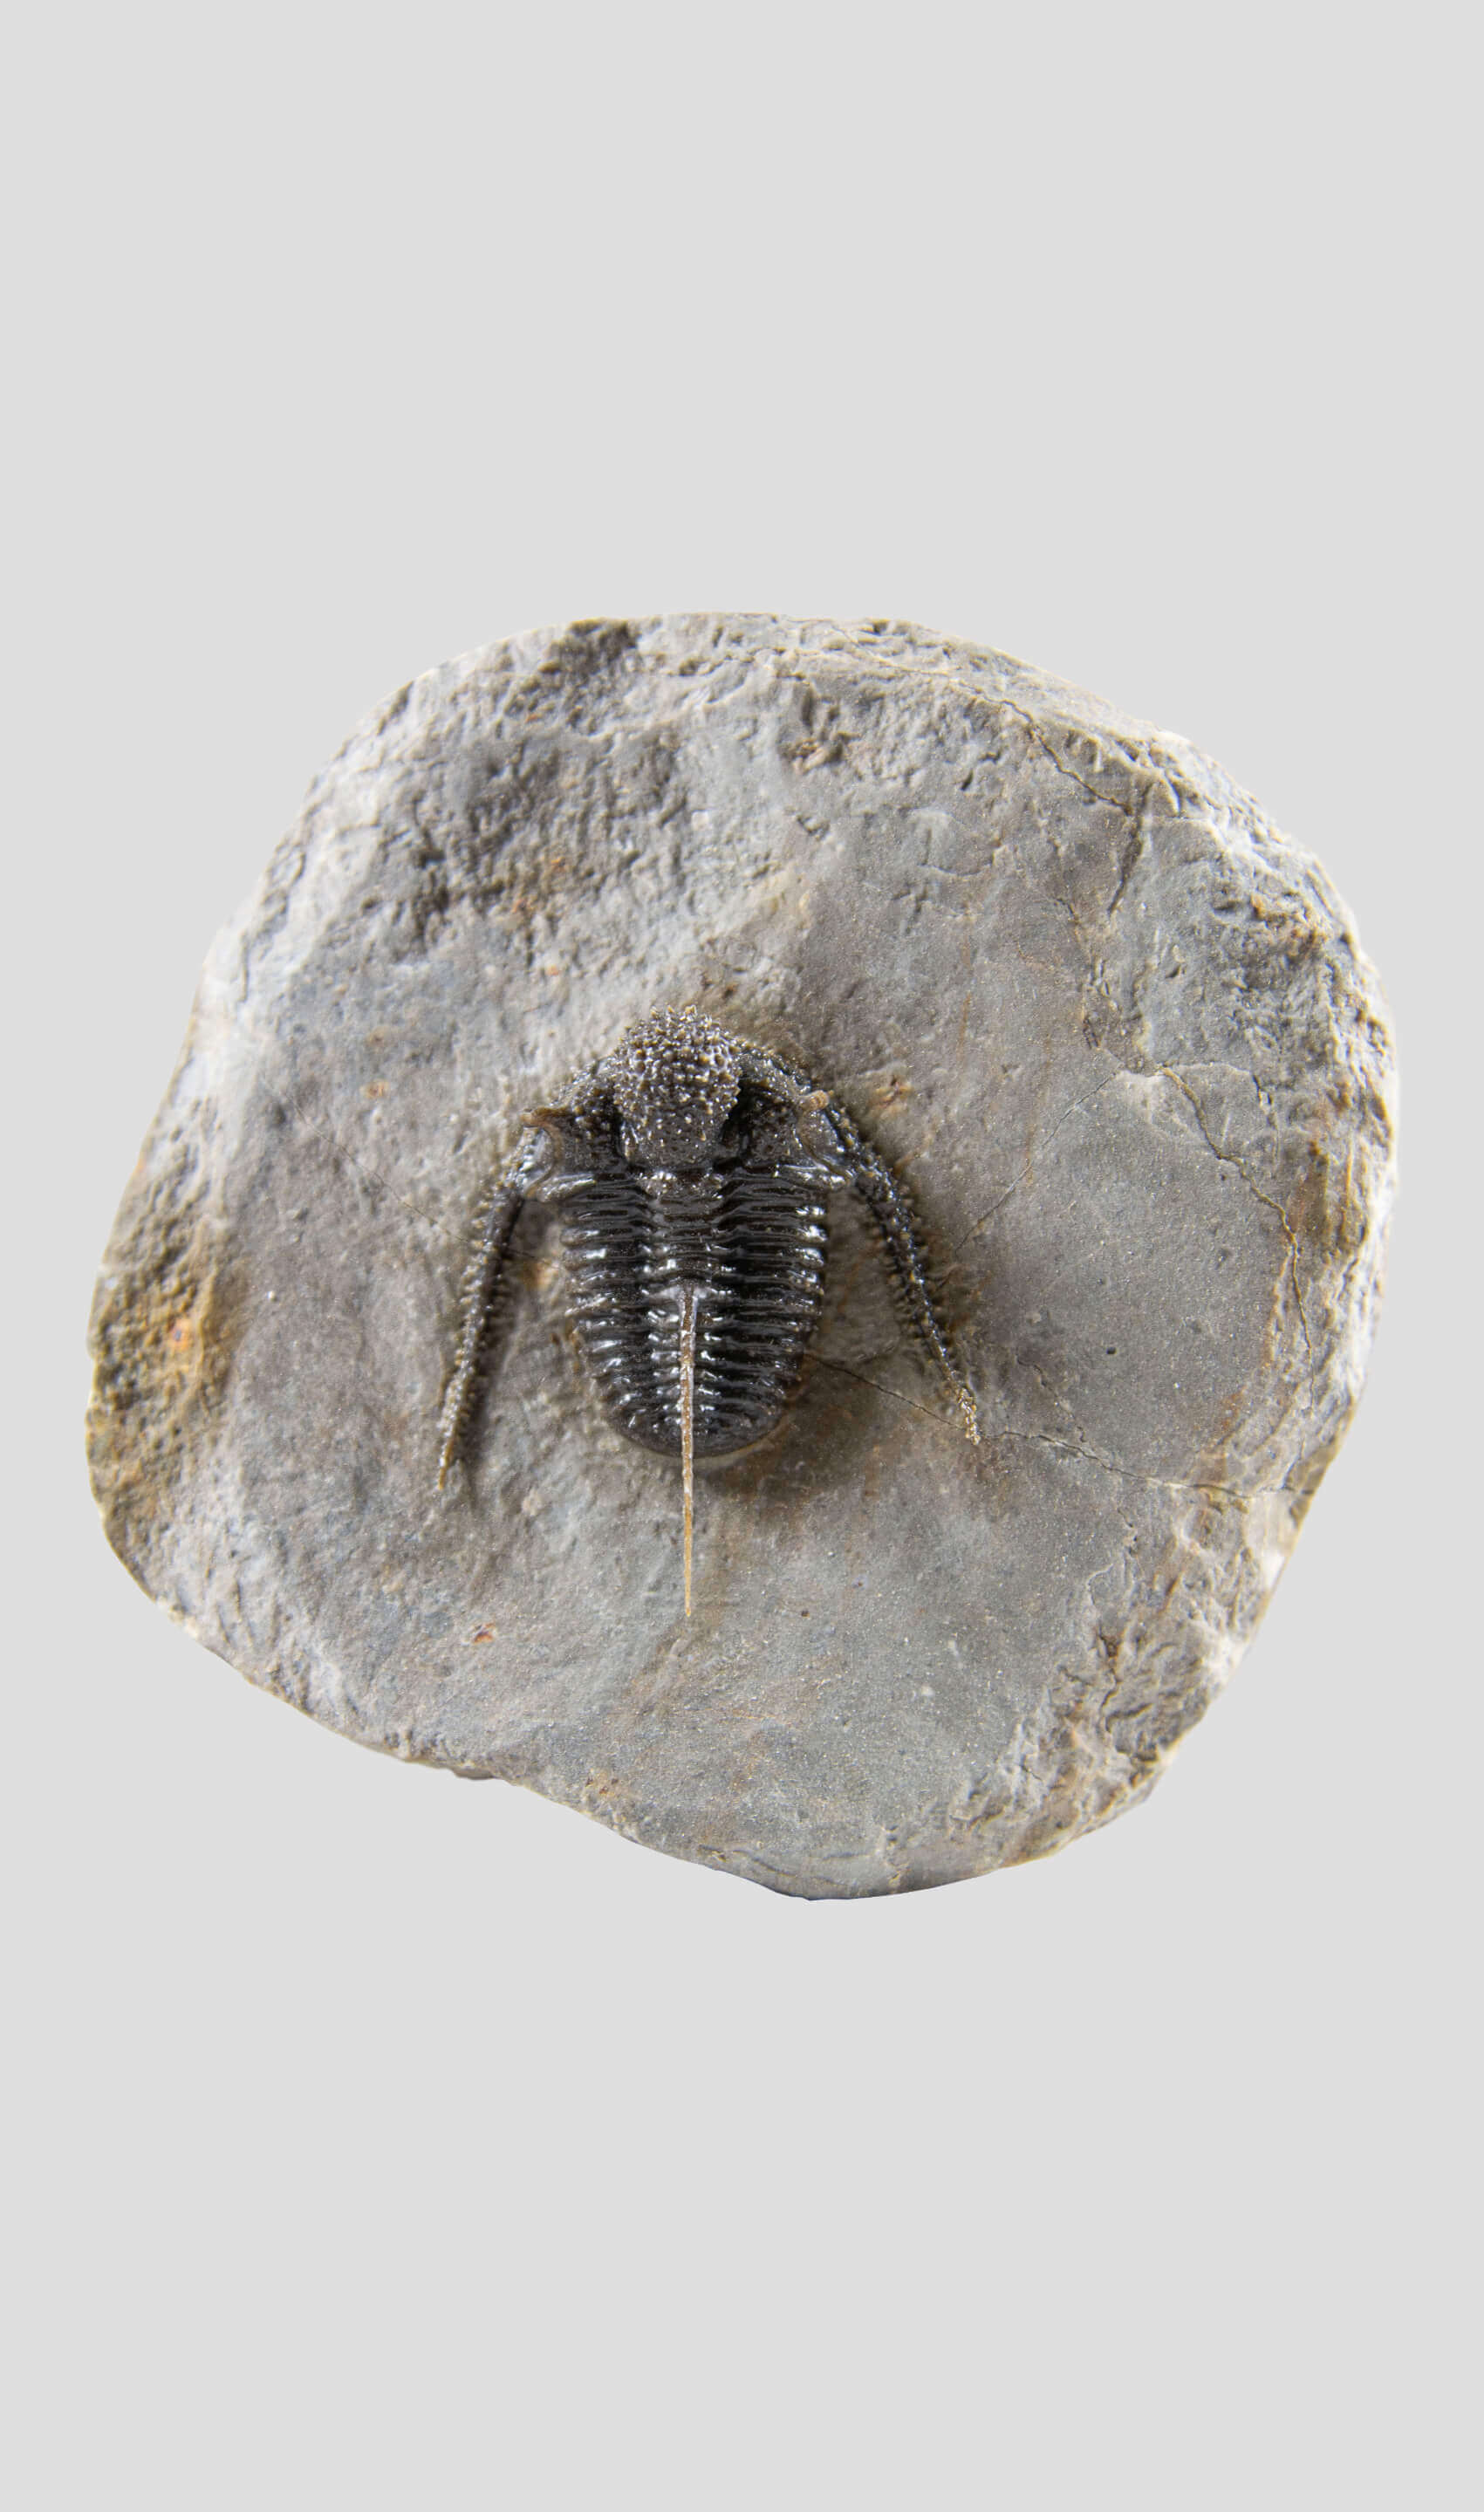 A very nice authentic rare spiny trilobite fossil for sale 99